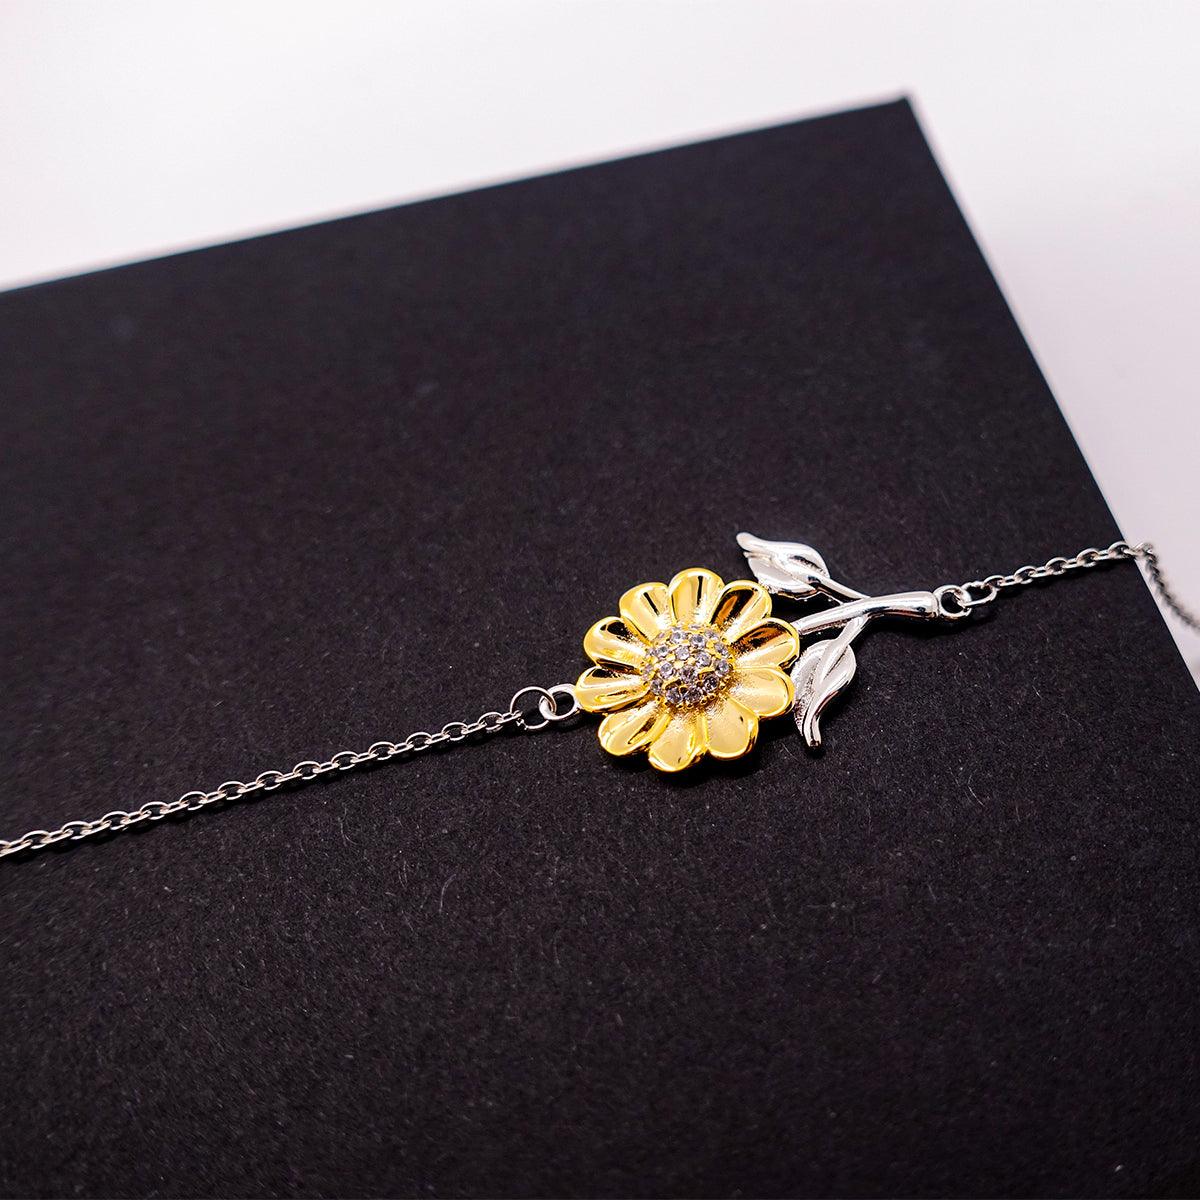 Aeronautical Engineer Sunflower Bracelet - Thanks for being who you are - Birthday Christmas Jewelry Gifts Coworkers Colleague Boss - Mallard Moon Gift Shop